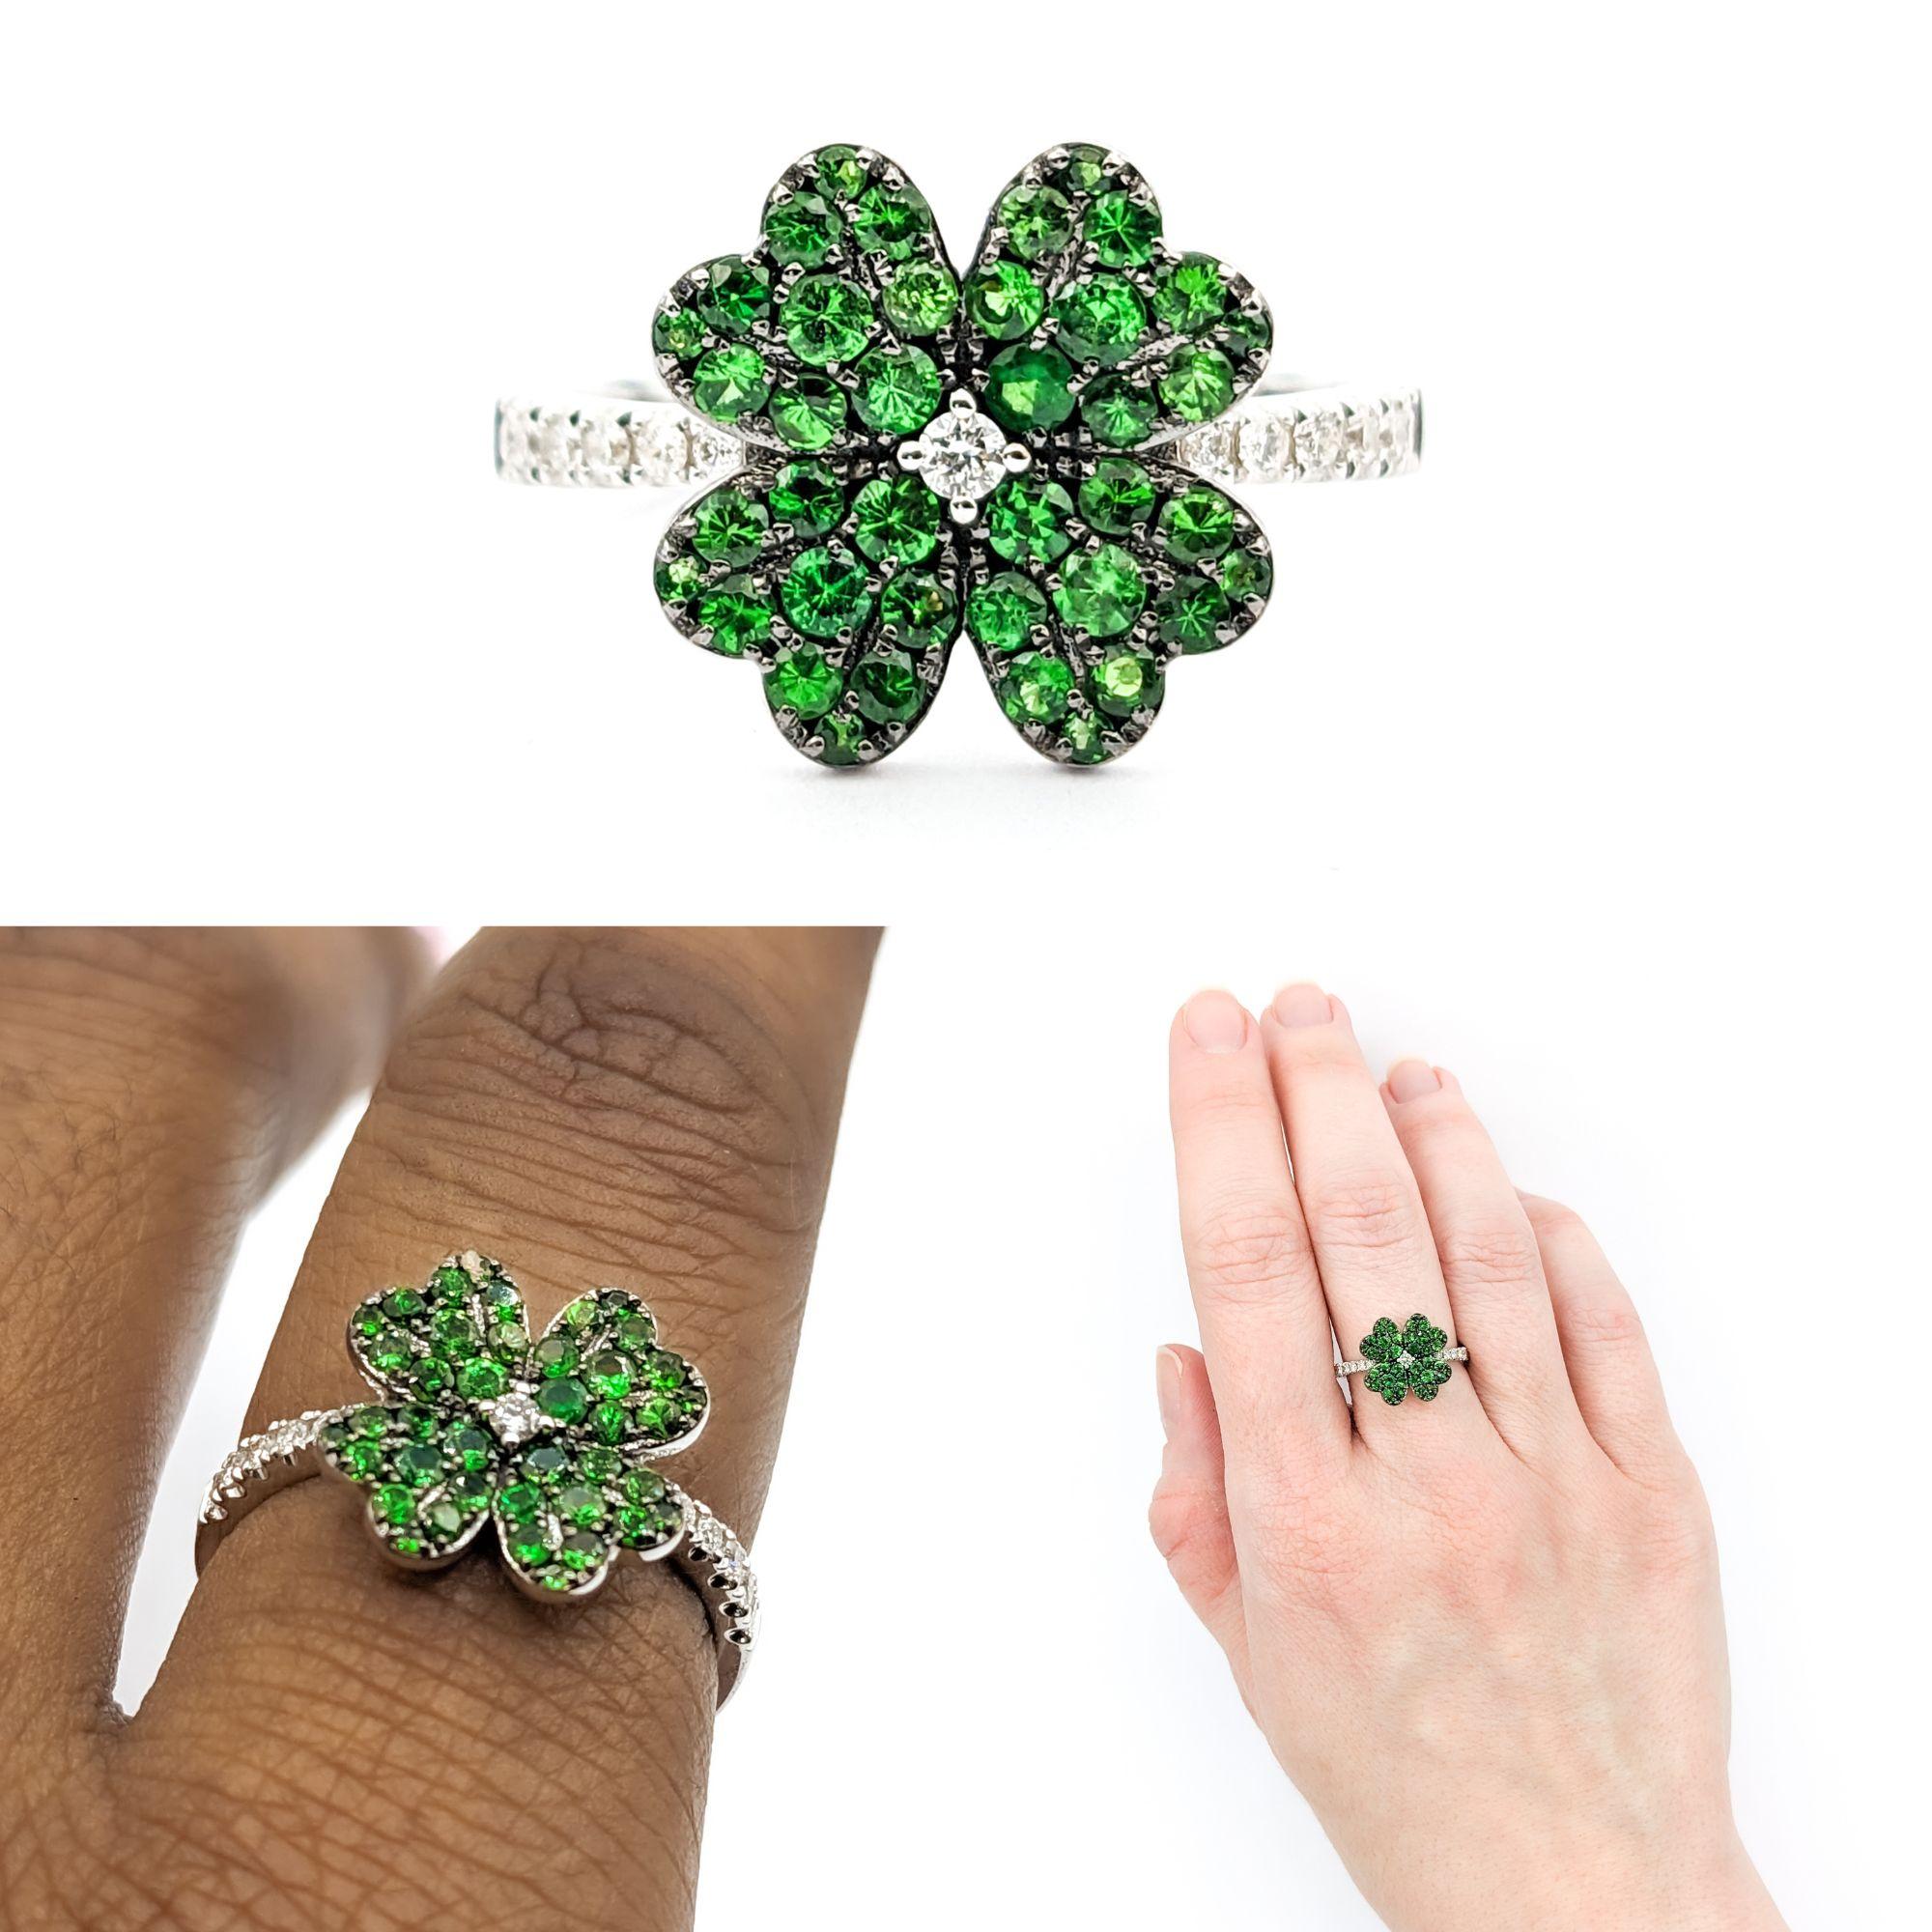 Four Leaf Clover Shamrock Ring with Tsavorite Garnets & Diamonds in 14kt White Gold

Discover the enchanting beauty of this 14kw White Gold Ring, adorned with a delightful 4-Leaf Clover design embellished with .16ctw of sparkling Diamonds. The